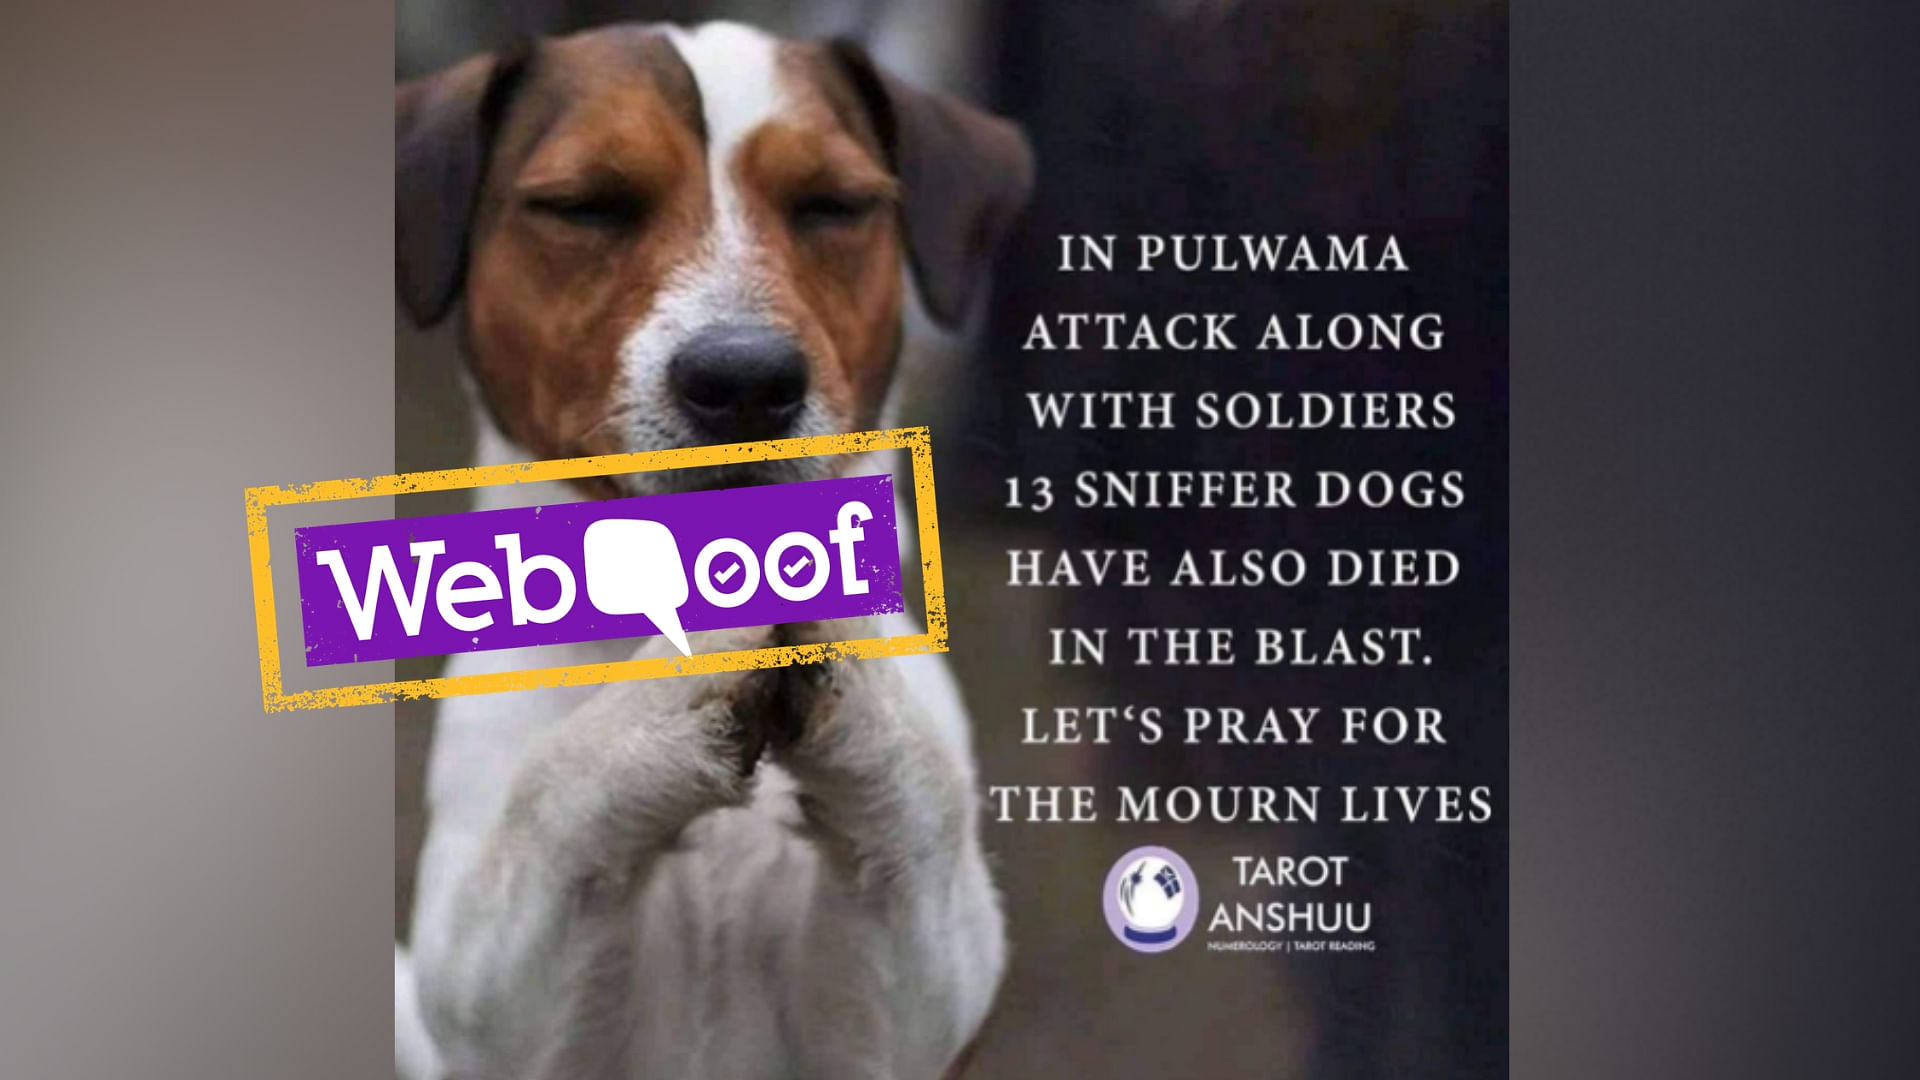 A CRPF official confirmed to The Quint that no sniffer dogs were involved as casualties in the attack.